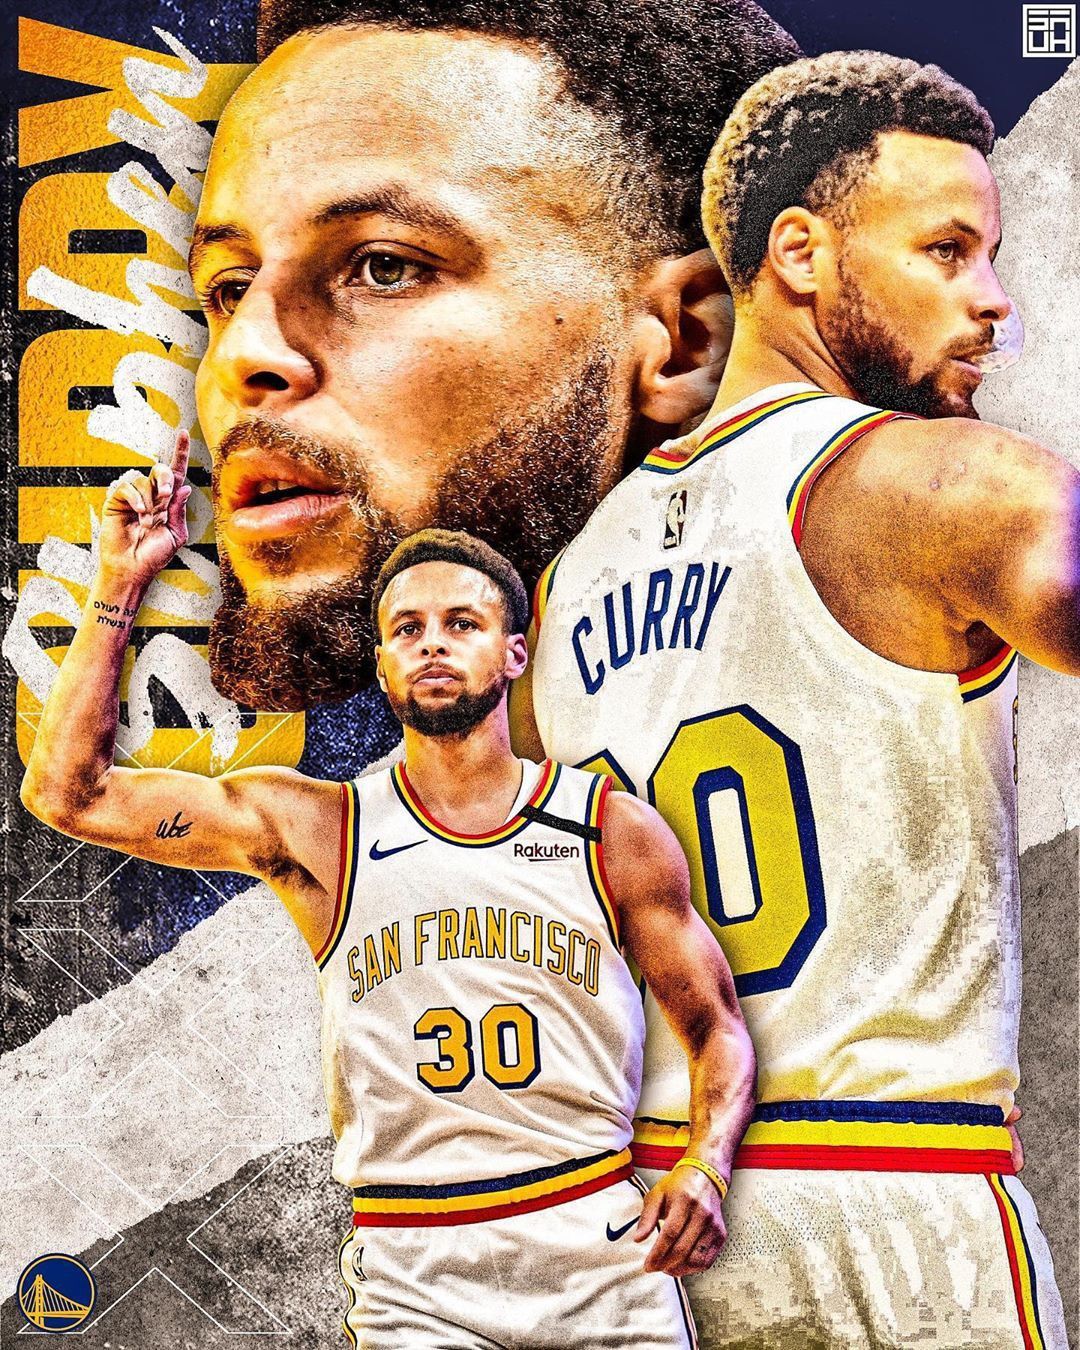 Stephen Curry Wallpapers  Top 35 NBA Stephen Curry Backgrounds